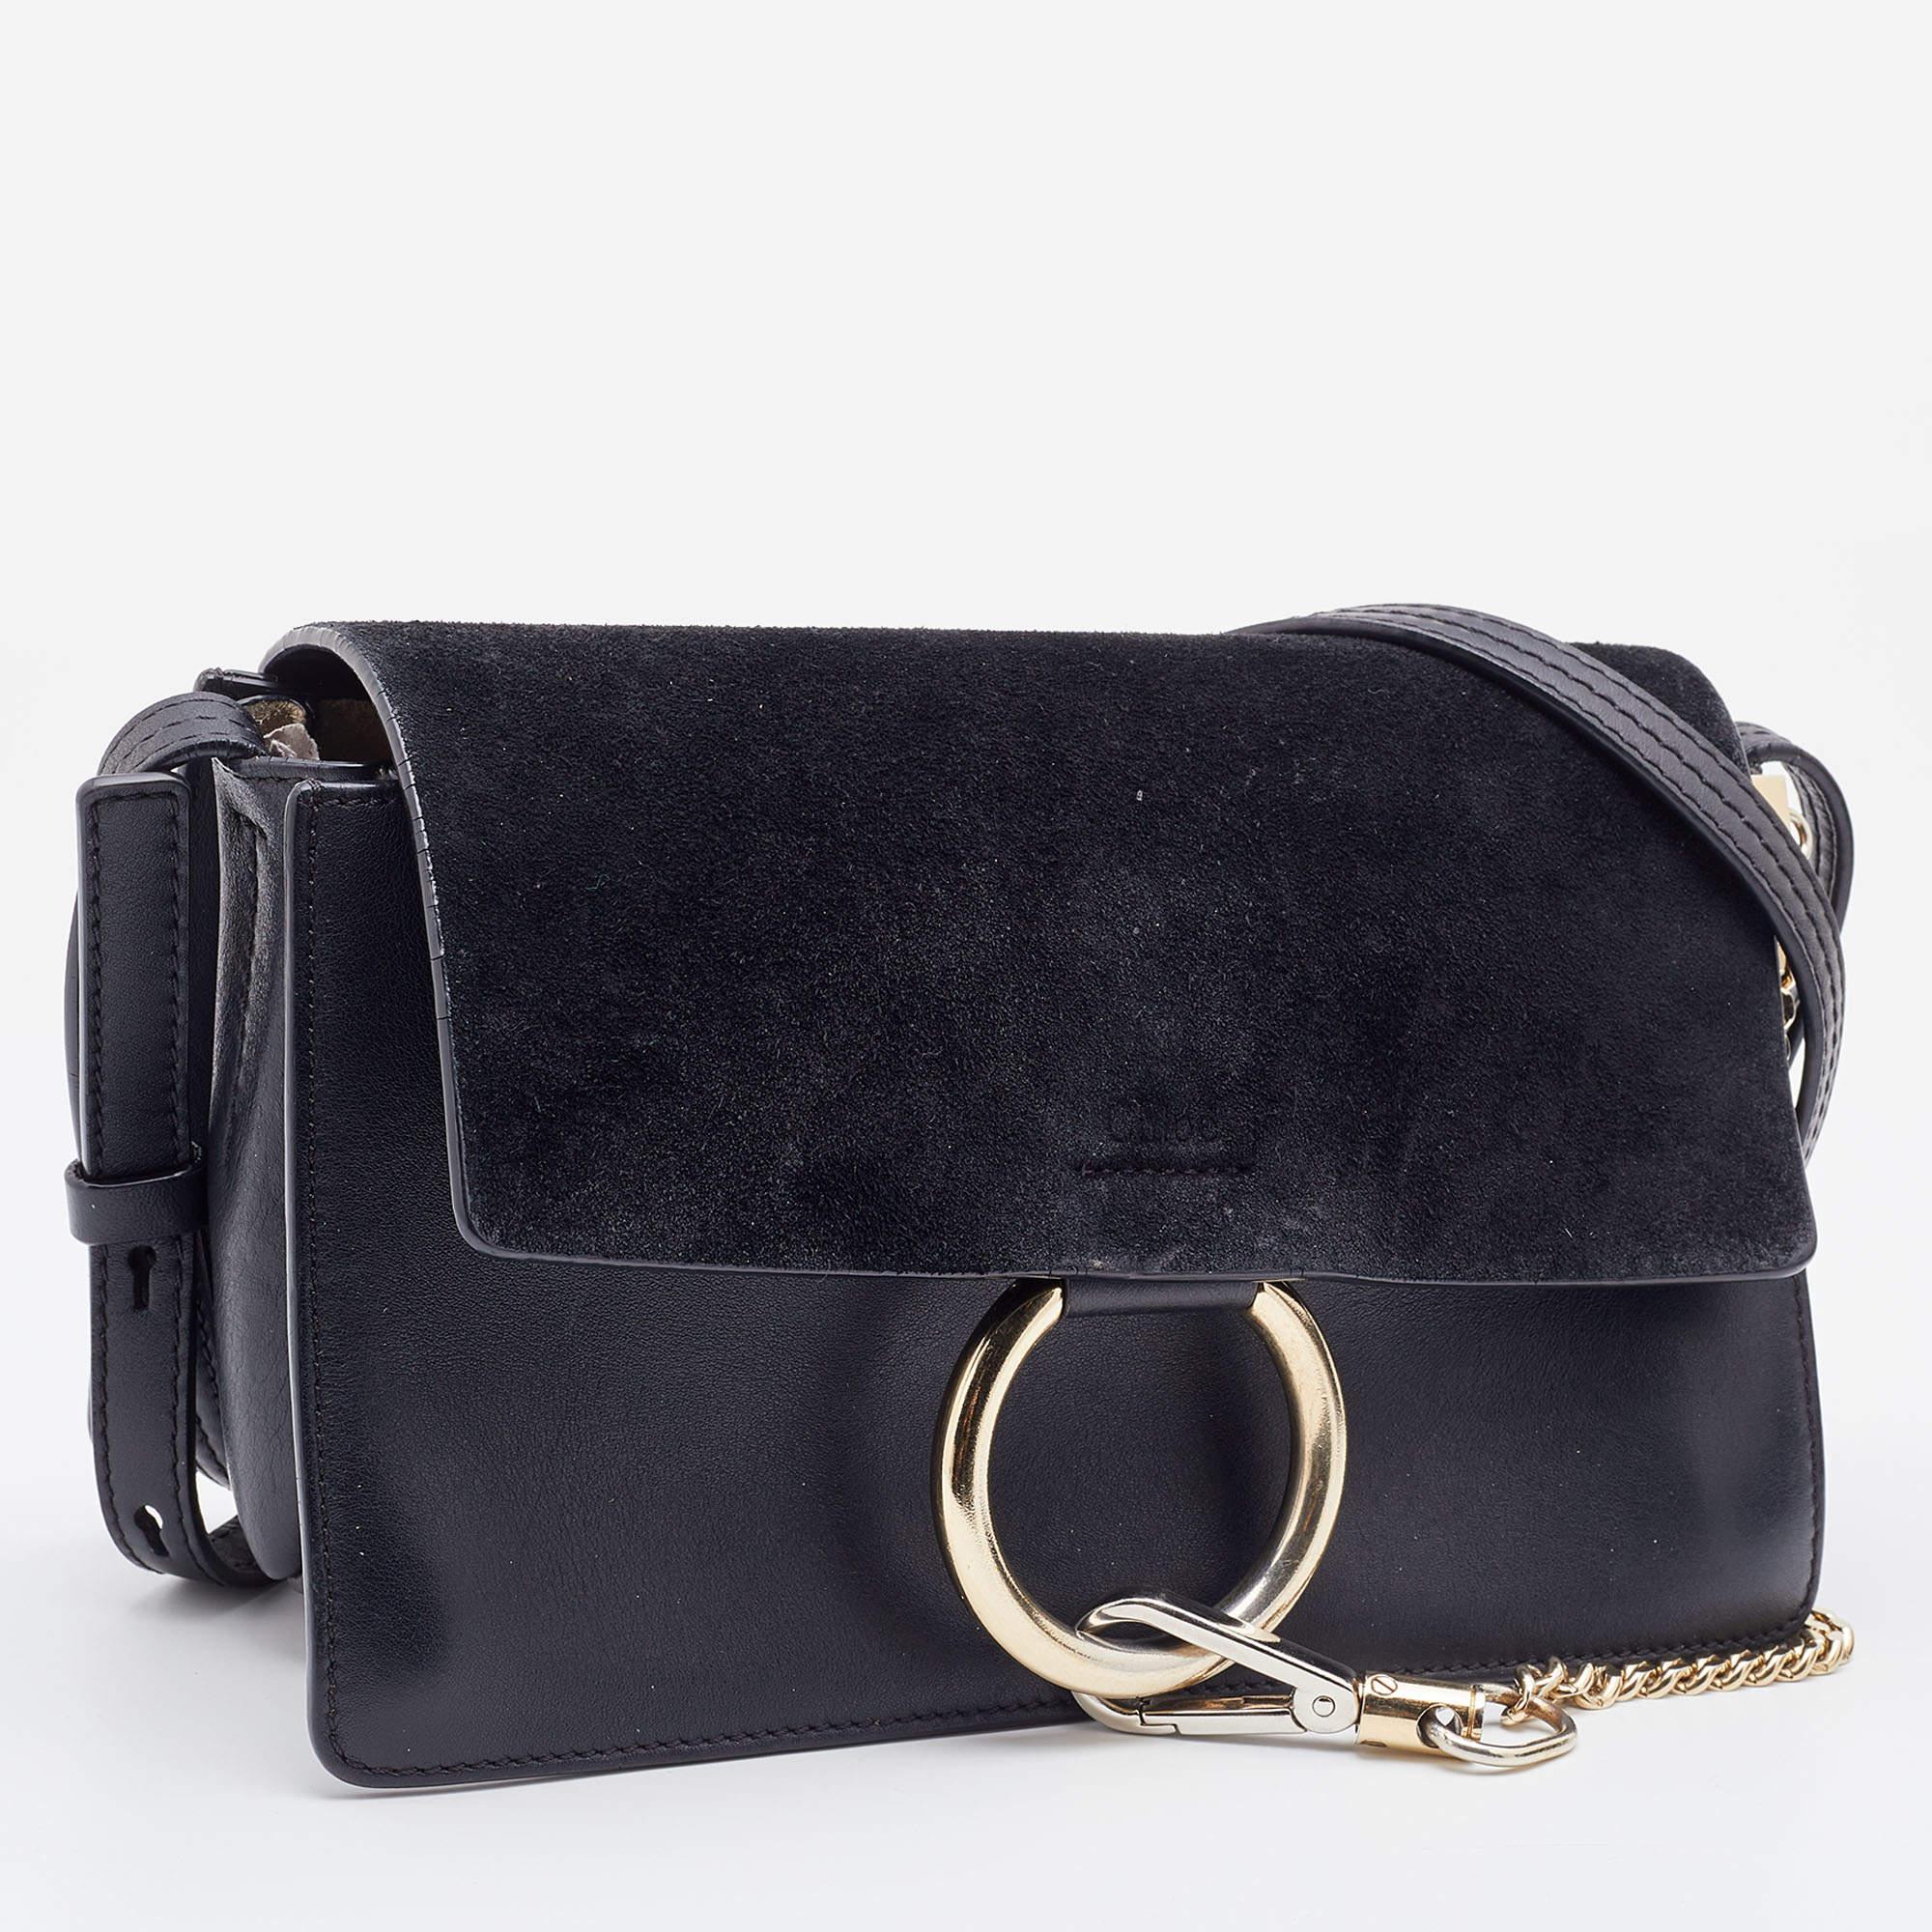 Women's Chloe Black Leather and Suede Small Faye Shoulder Bag